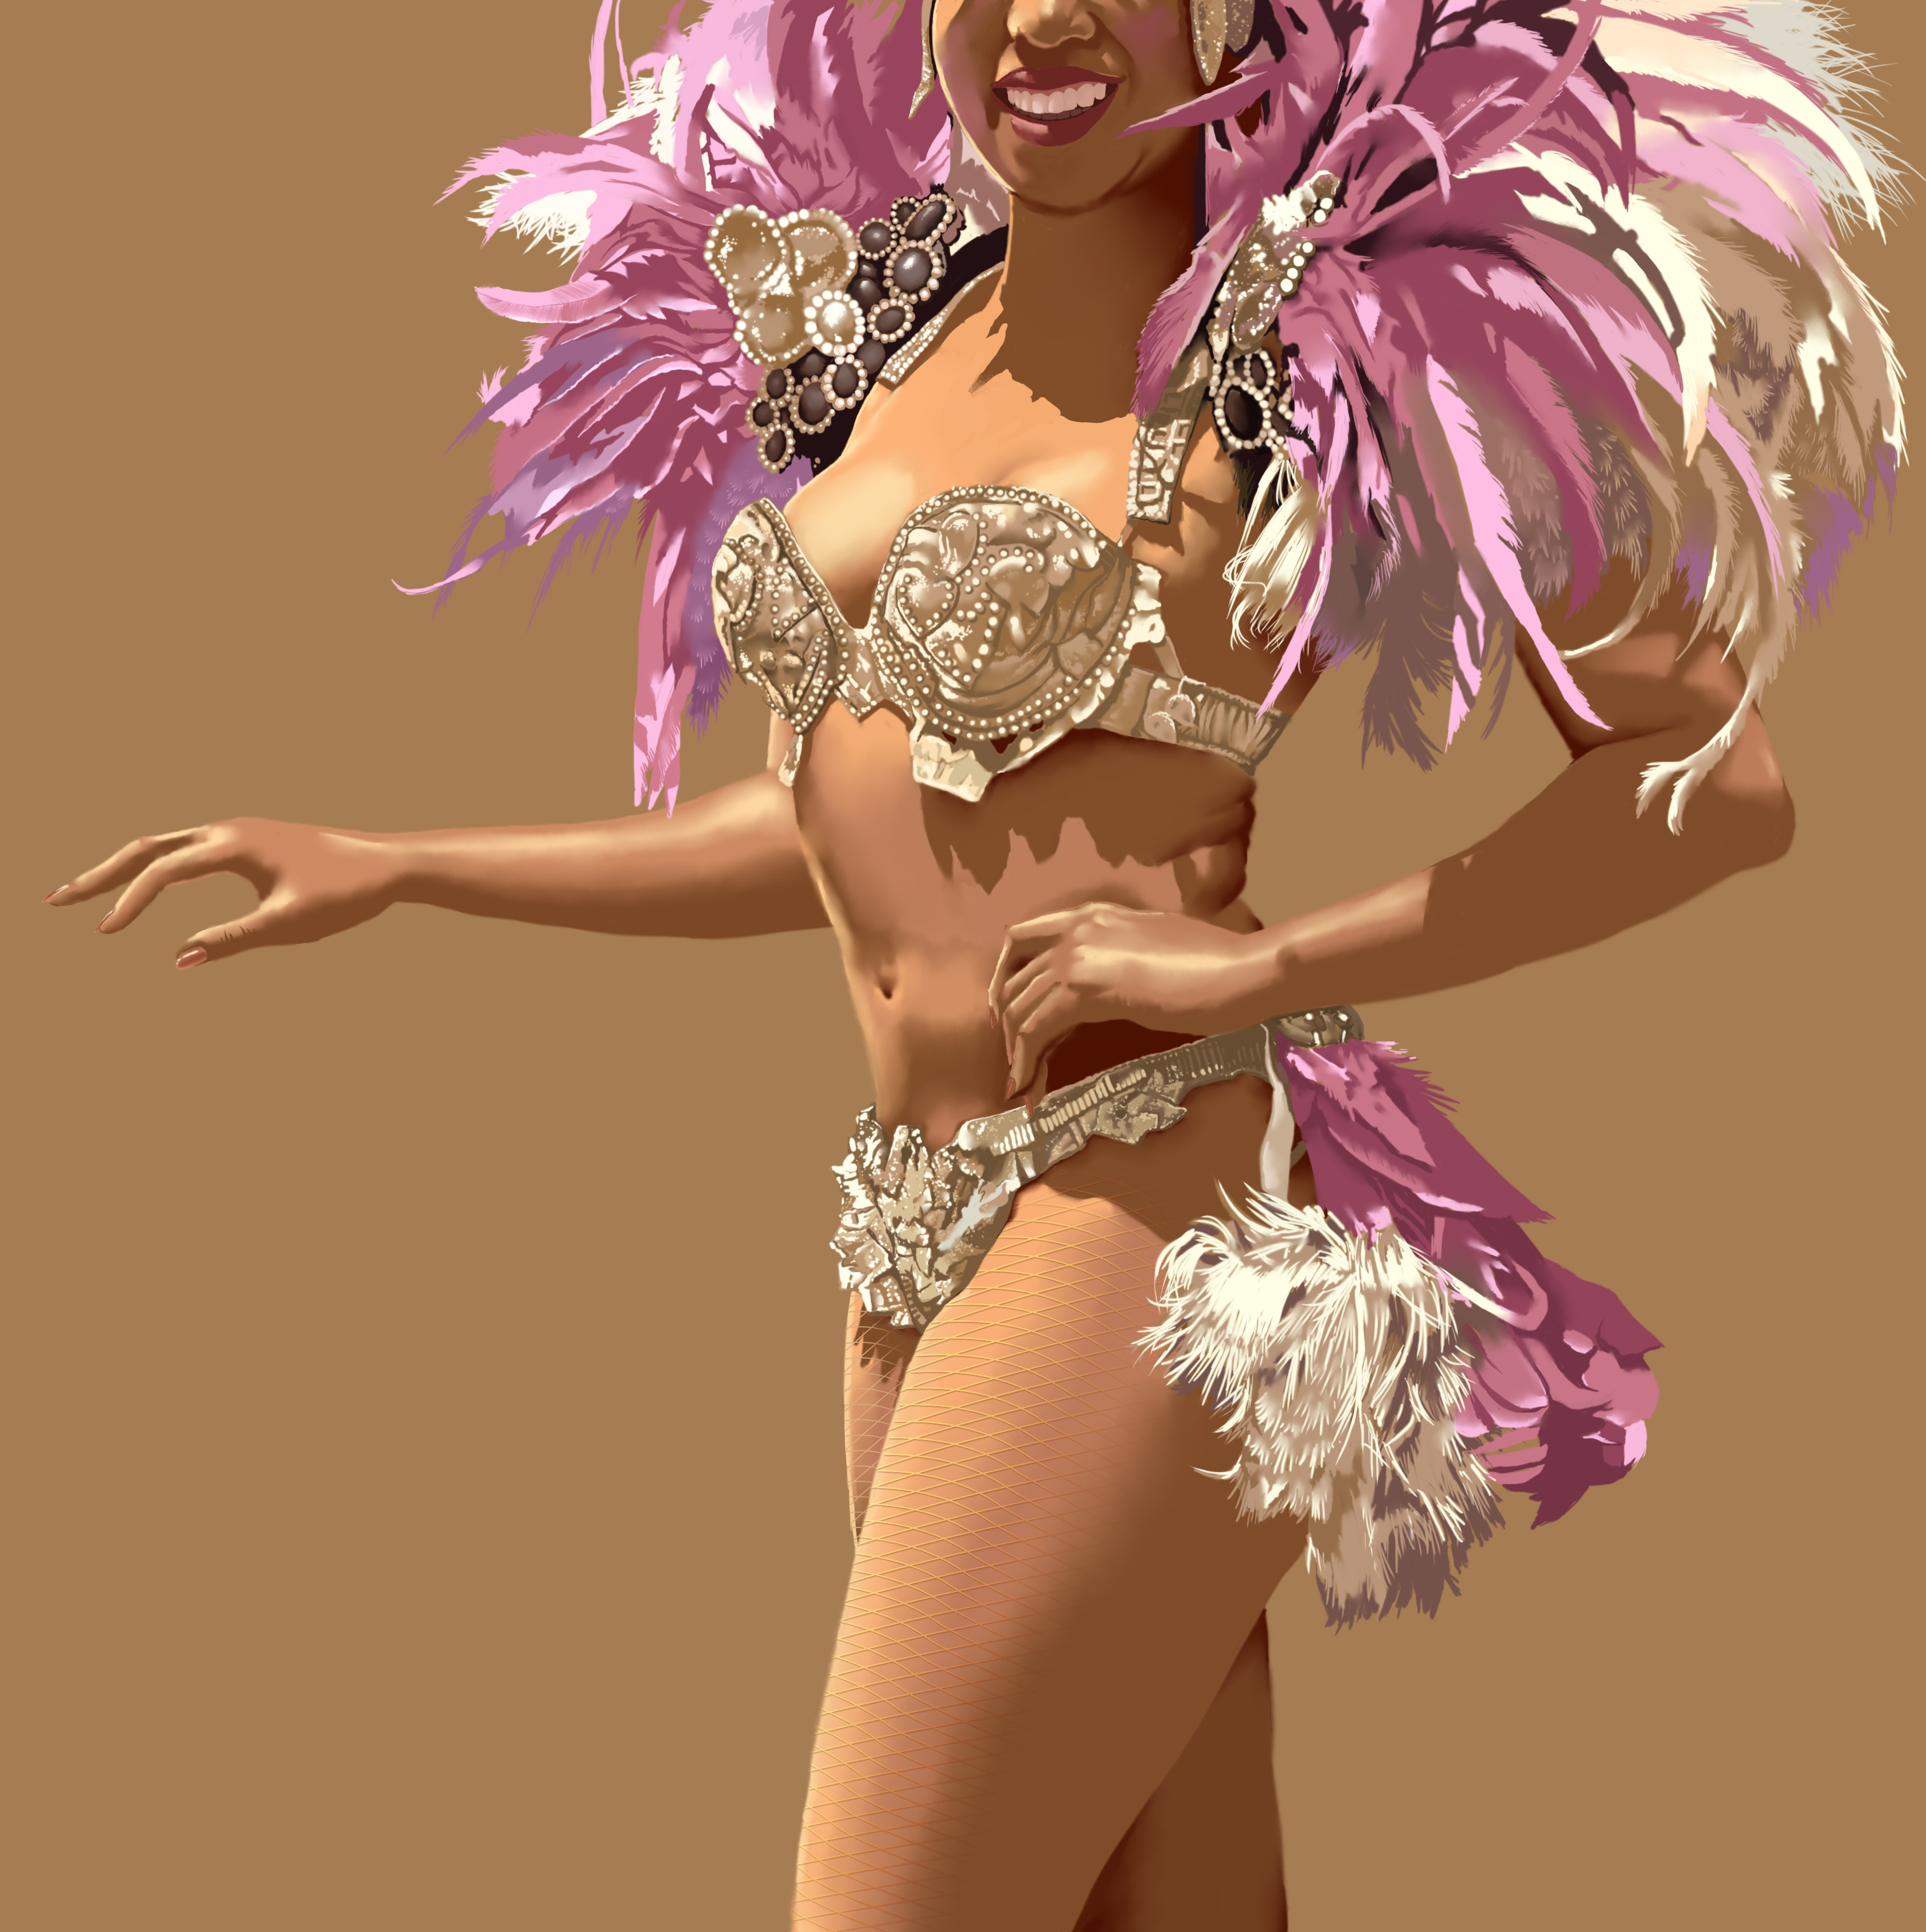 Painting of a dancing Samba Girl. Painted in Photoshop.